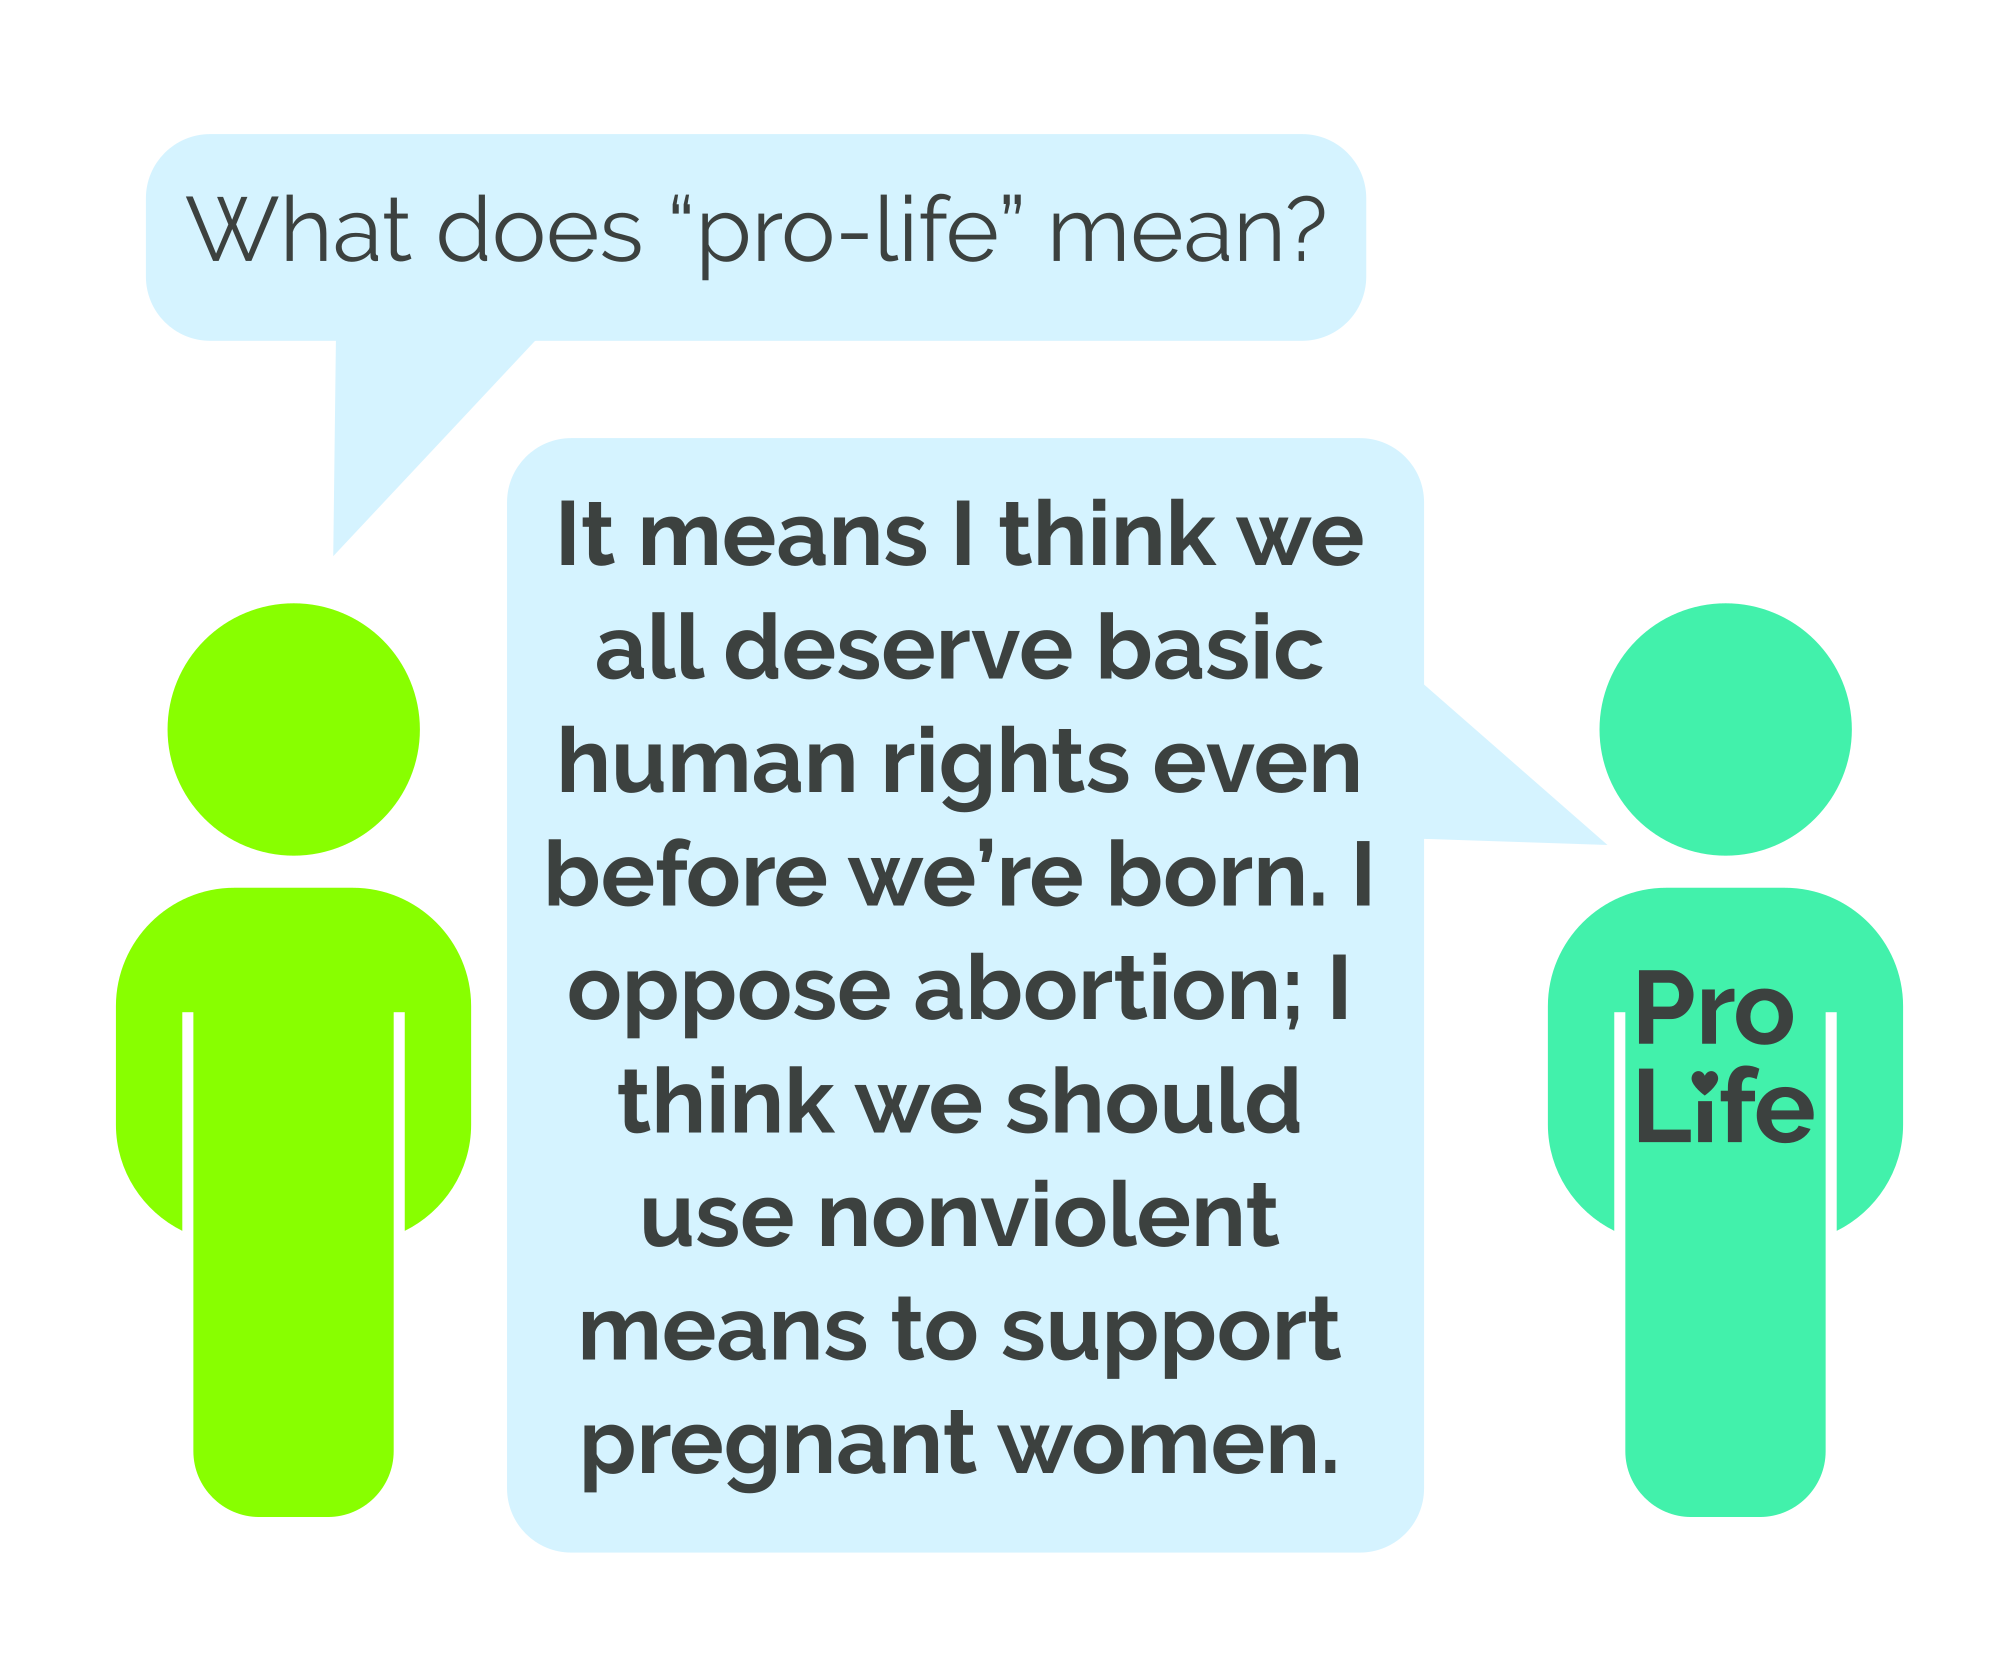 Person 1: What does “pro-life” mean? Person 2 (our hero): It means I think we all deserve basic human rights even before we’re born. I oppose abortion; I think we should use nonviolent means to support pregnant women.